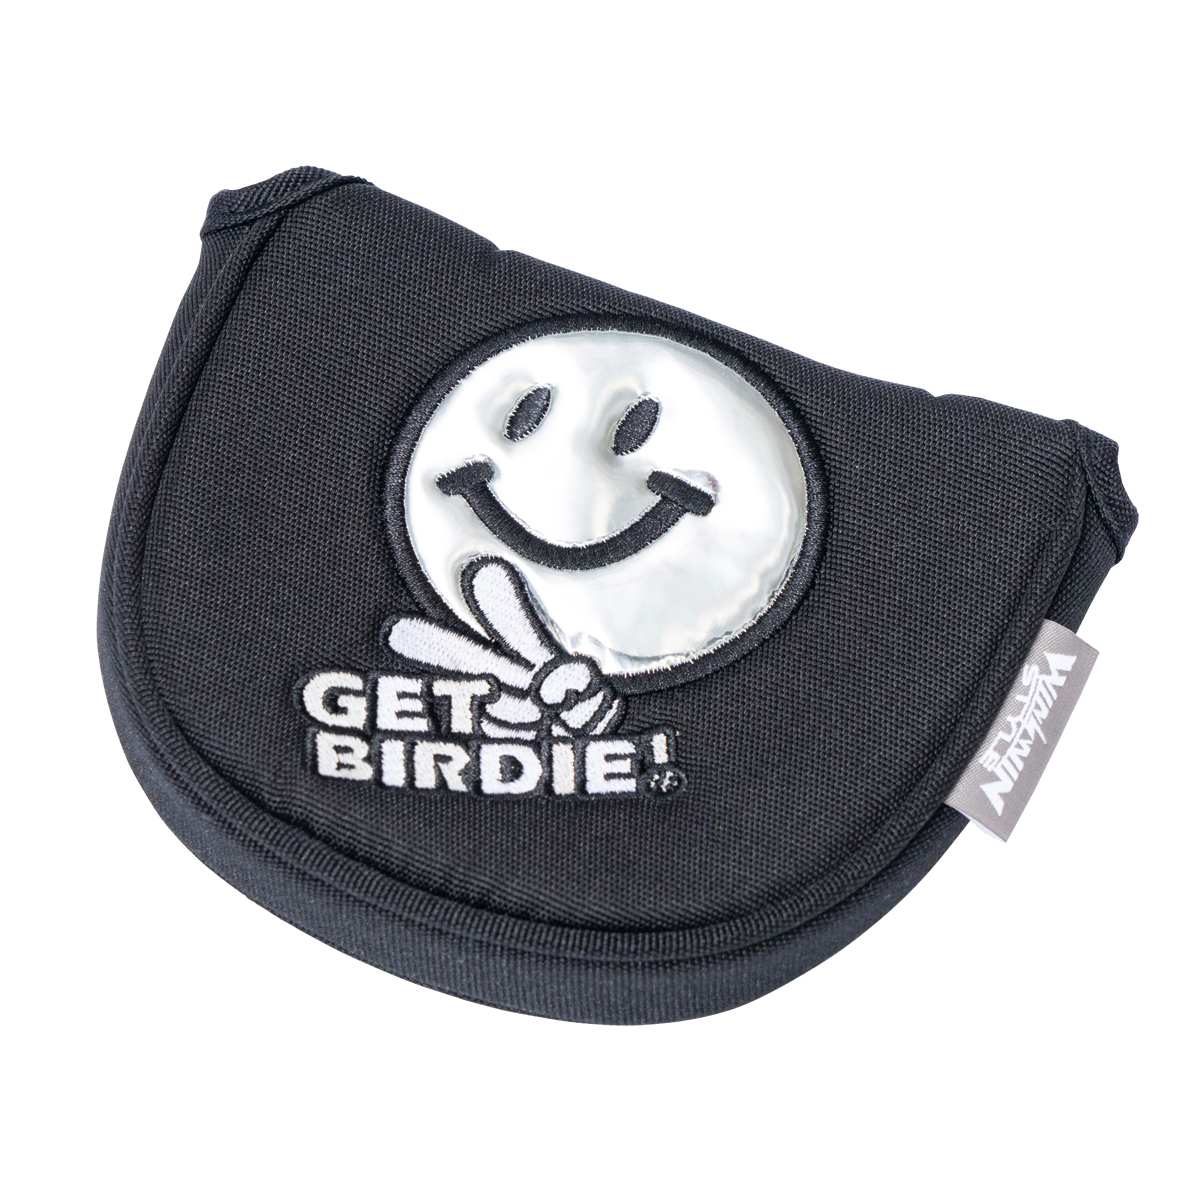 GET BIRDIE! PUTTER COVER マレットタイプ